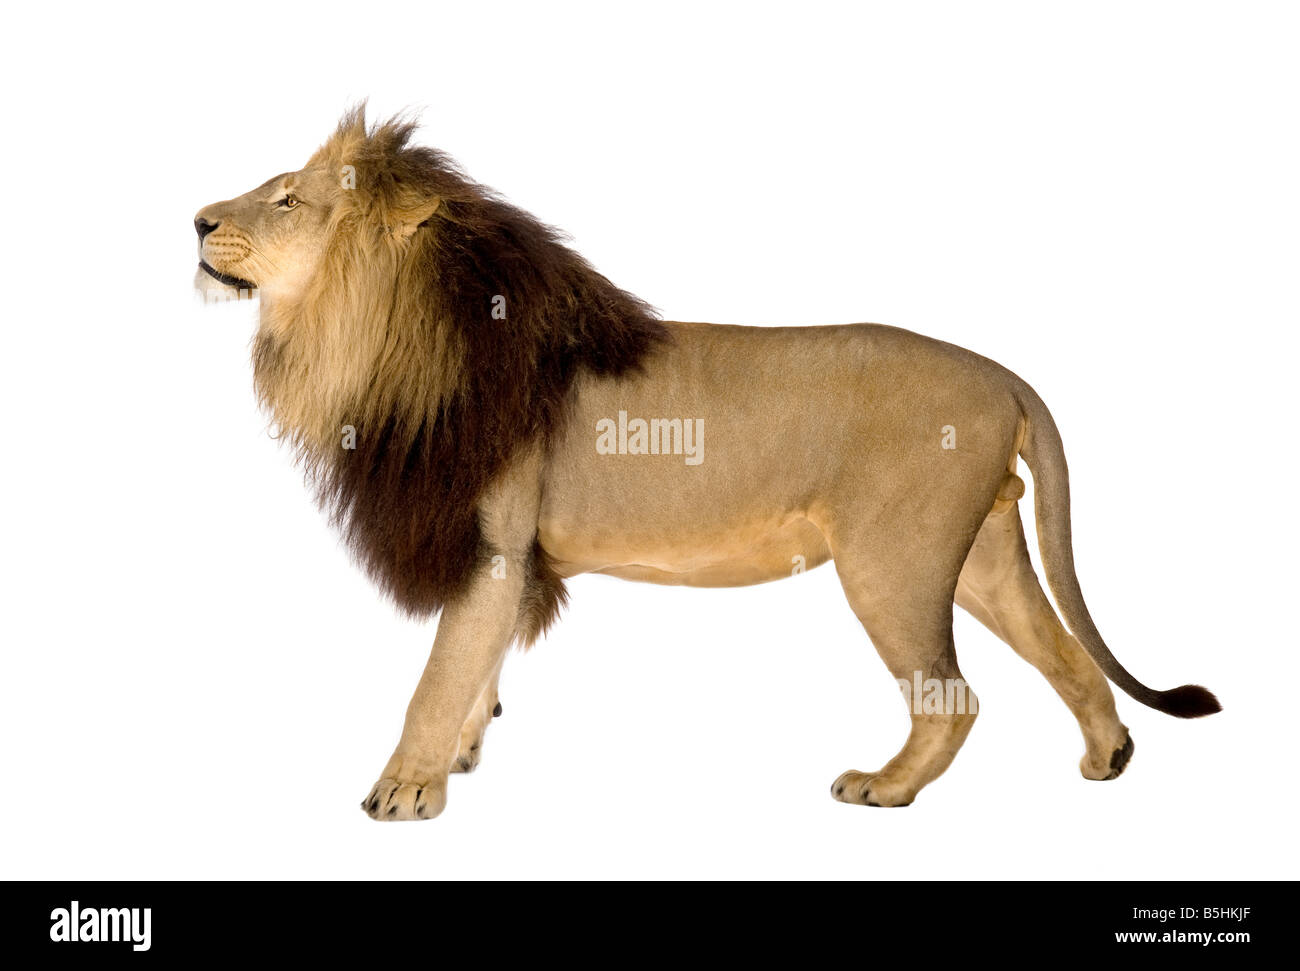 Lion in front of a white background Stock Photo